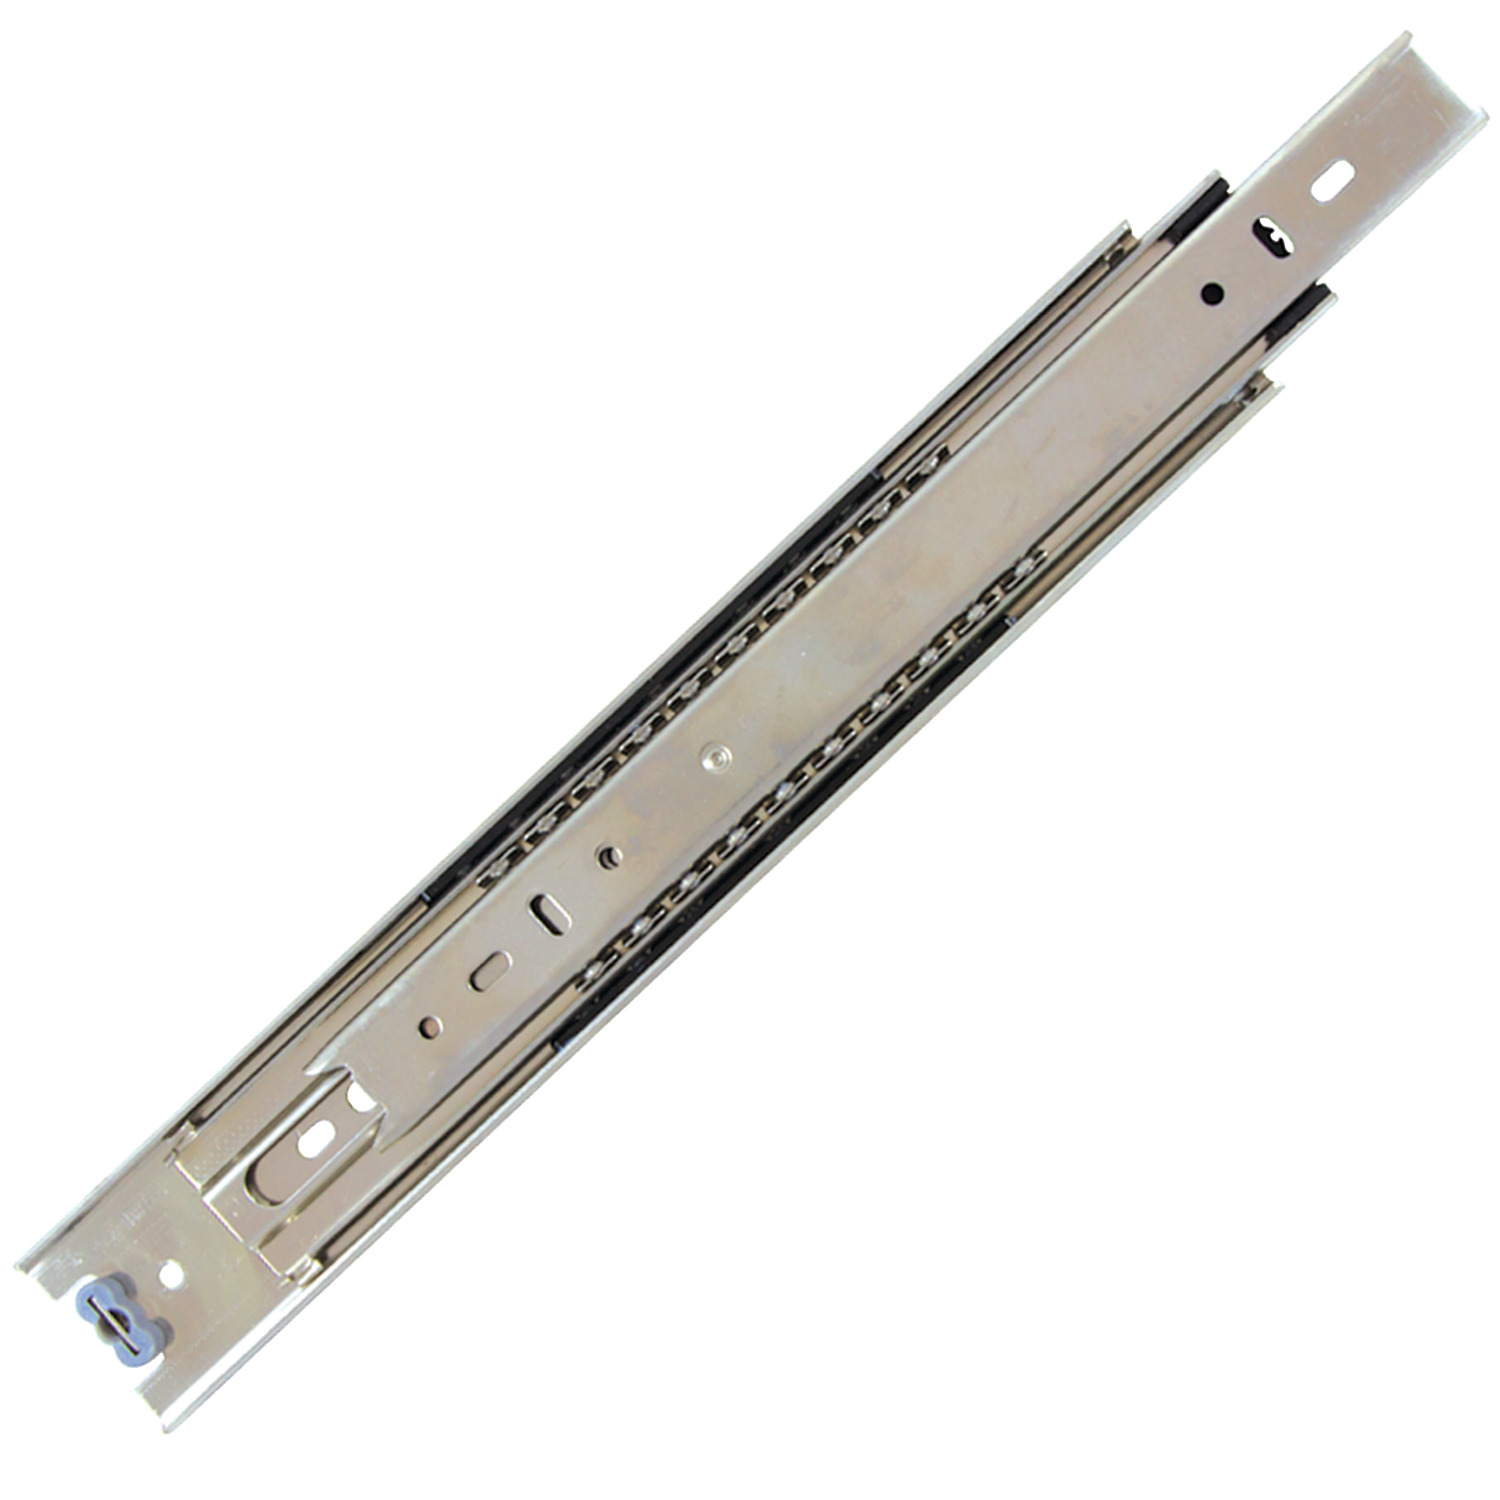 Drawer Slide - Full Extension A 3 beam stainless steel slide to support up to 45kg. Hold-in detent when slide is closed and positive stop. Lever disconnect for easy drawer removal.